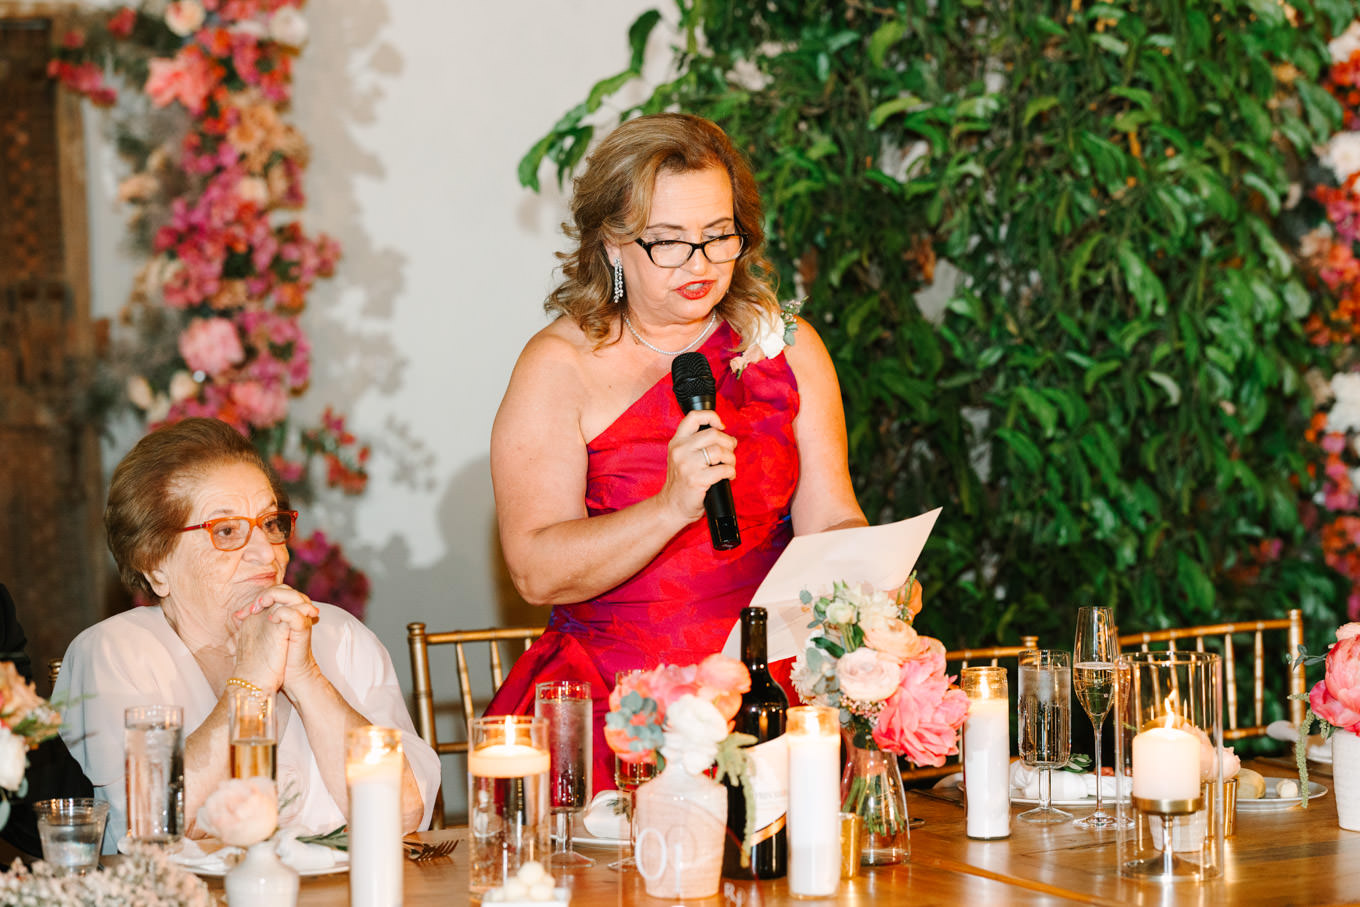 Guest giving a speech | Pink Bougainvillea Estate wedding | Colorful LA wedding photography | #bougainvilleaestate #palmspringswedding #palmspringsweddingvenue #palmspringsphotographer Source: Mary Costa Photography | Los Angeles